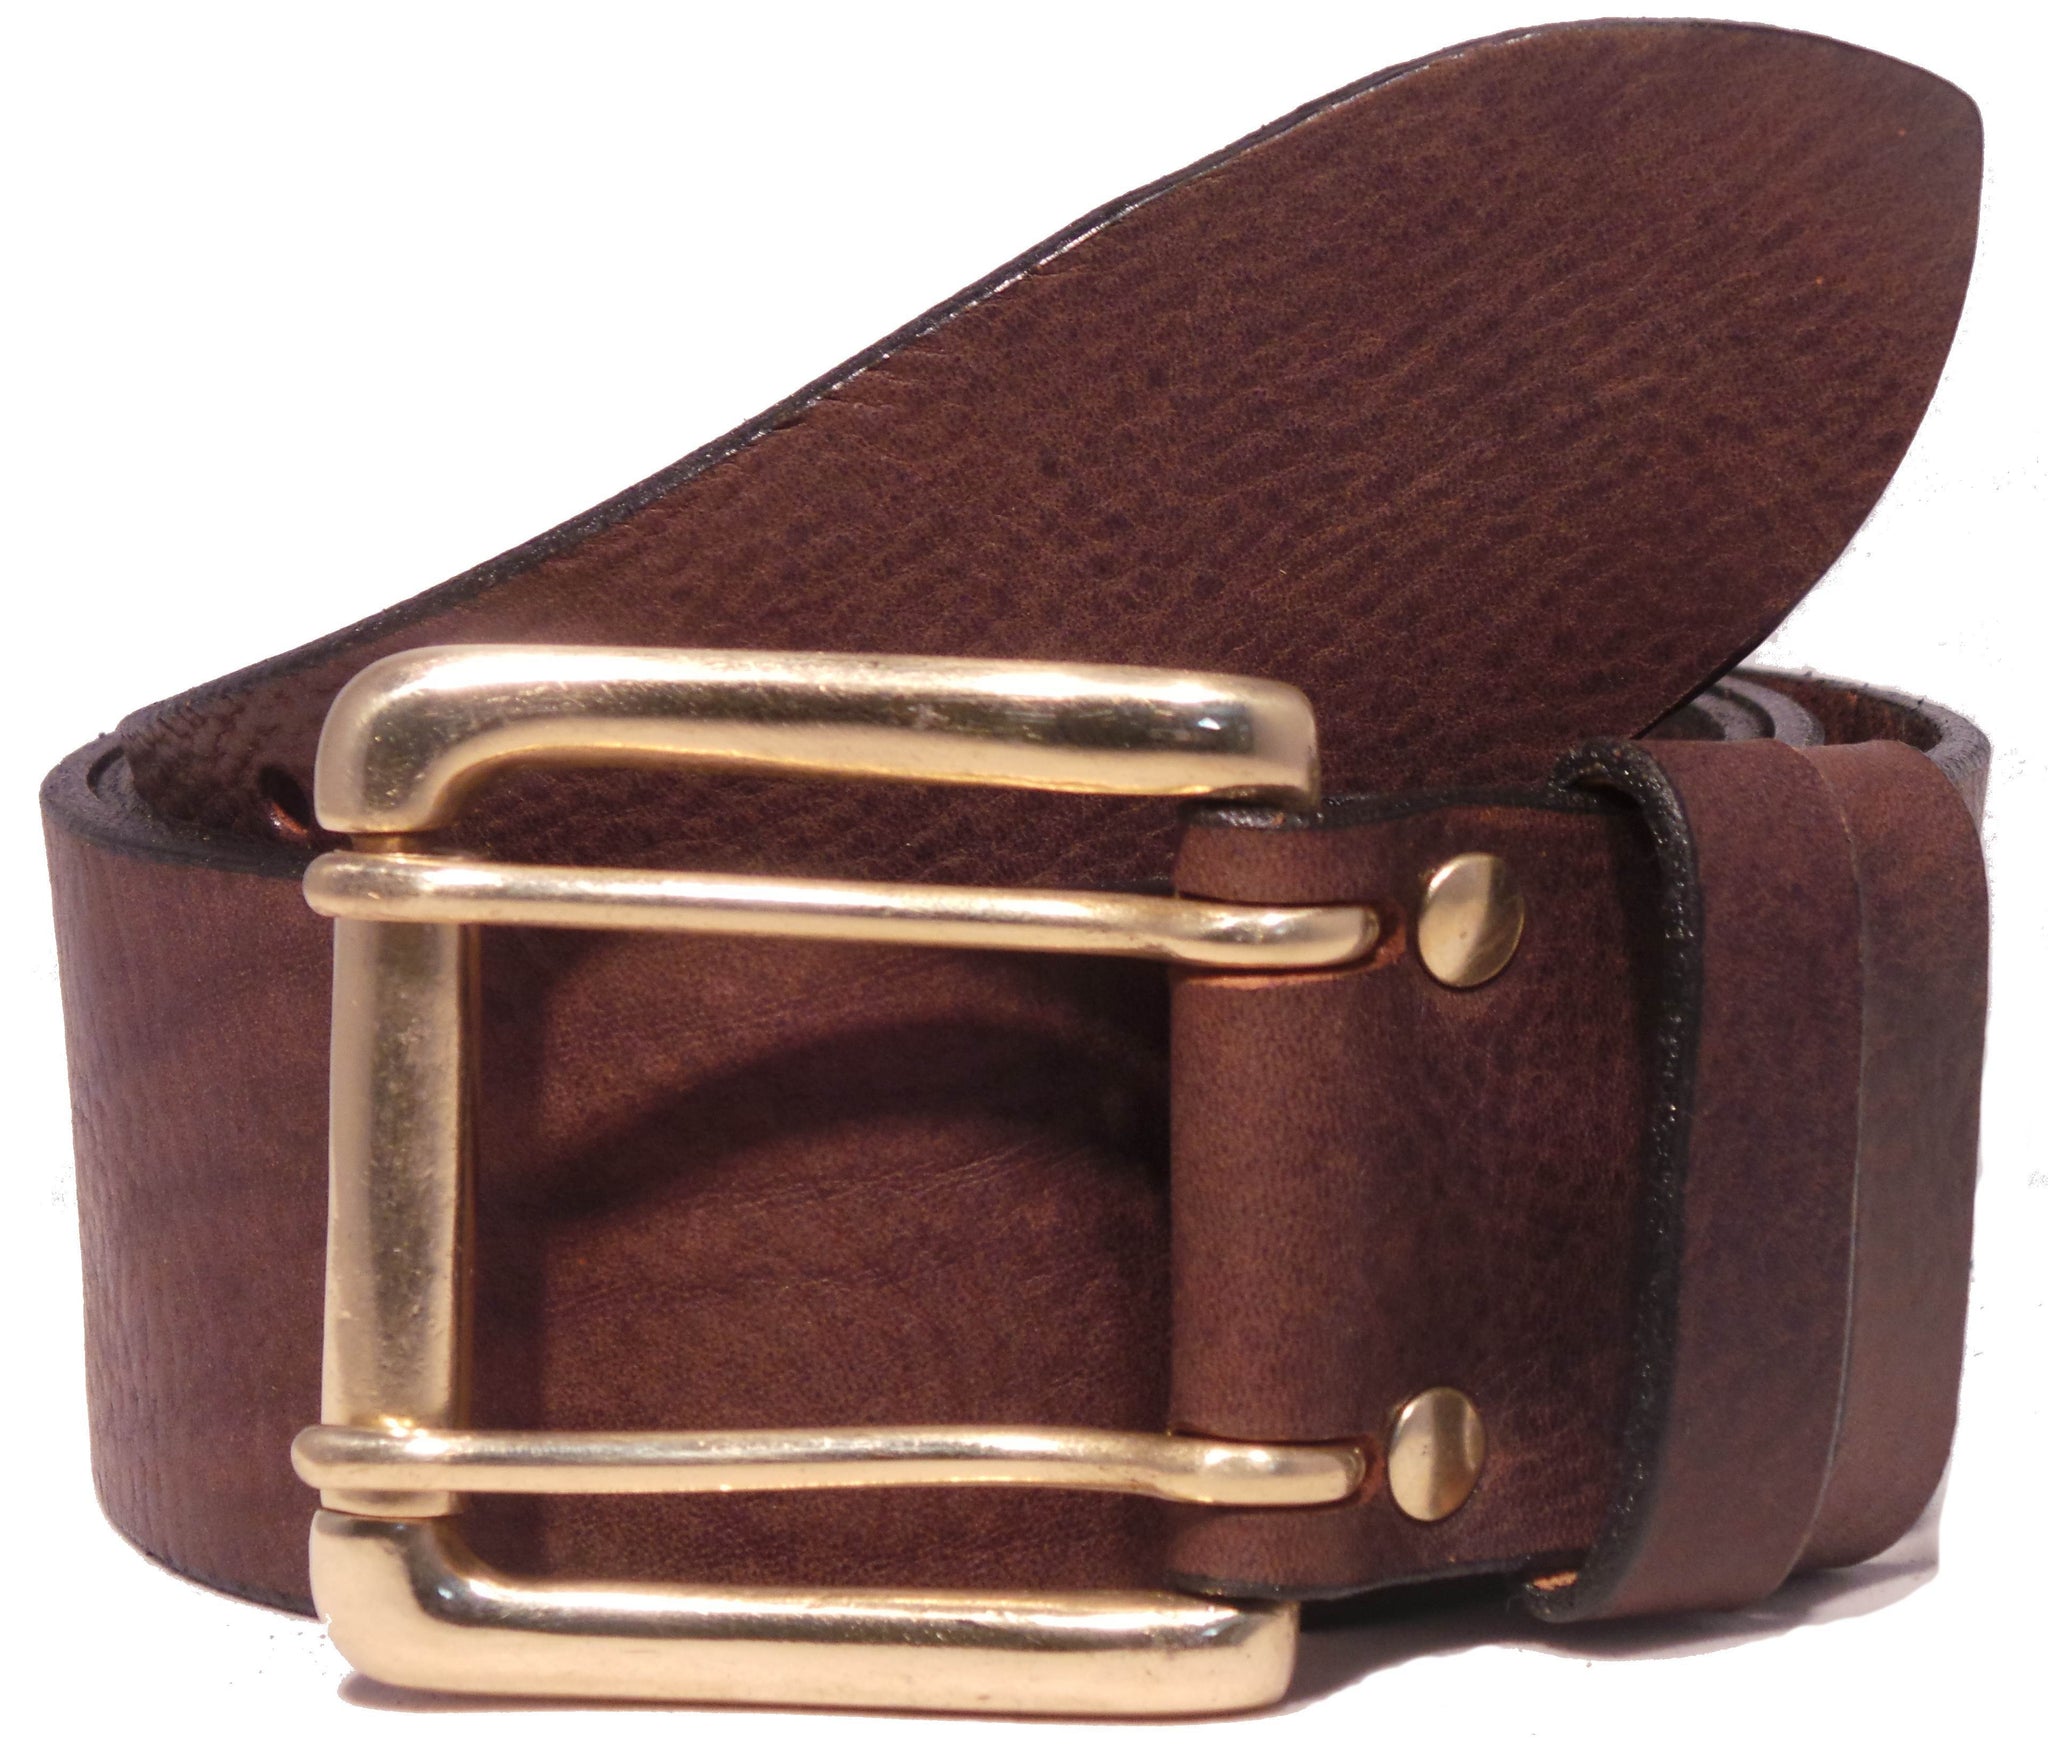 Double D ring belt - 85 / Chestnut / Suede leather